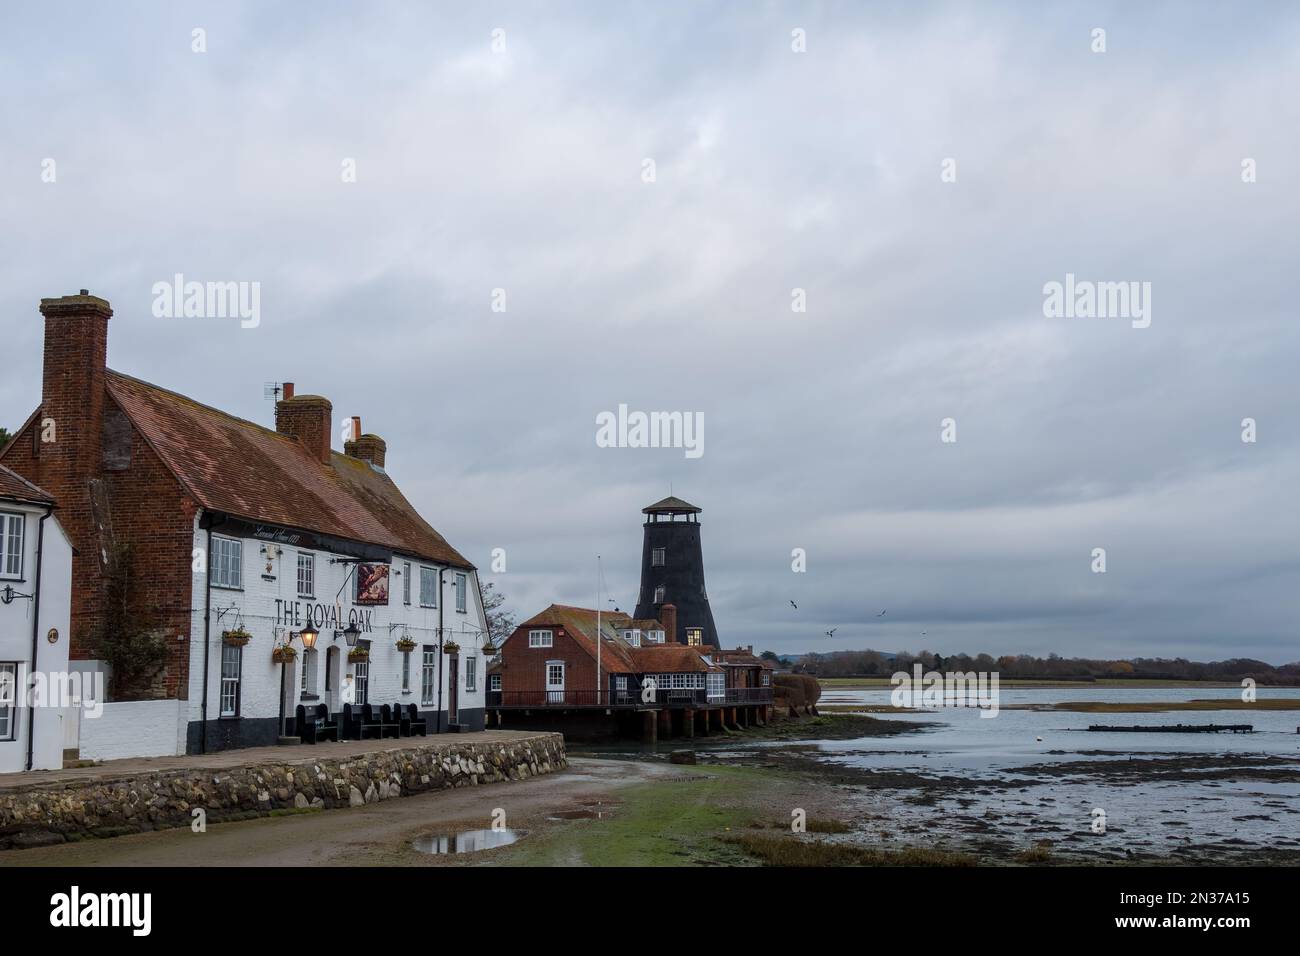 The Royal Oak Public House and Langstone Mill Hampshire England Stock Photo